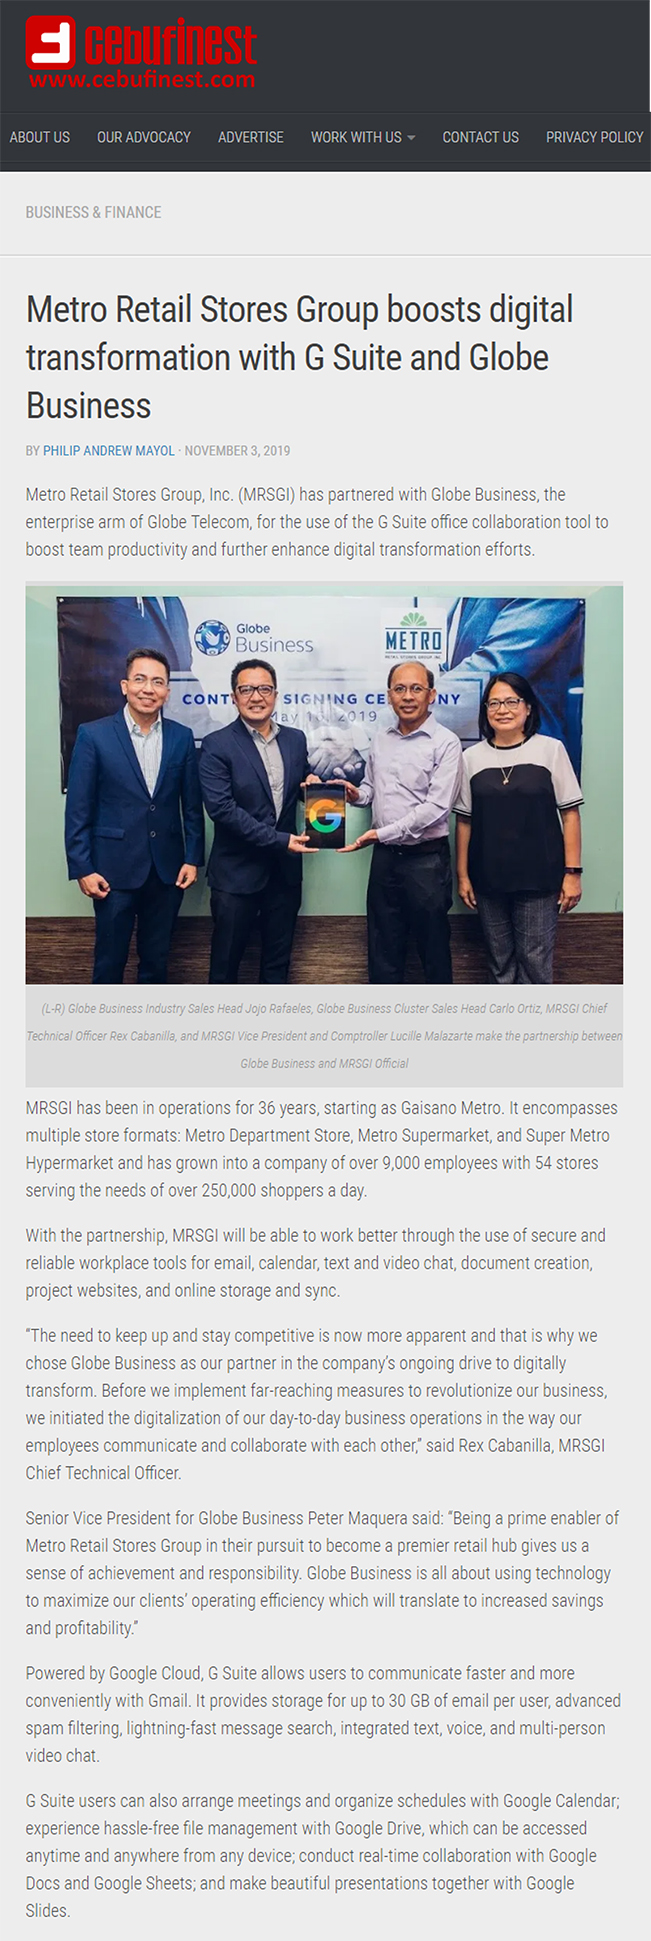 November 3 2019 Metro Retail Stores Group boosts digital transformation with G Suite and Globe Cebufinest www.cebufinest.com